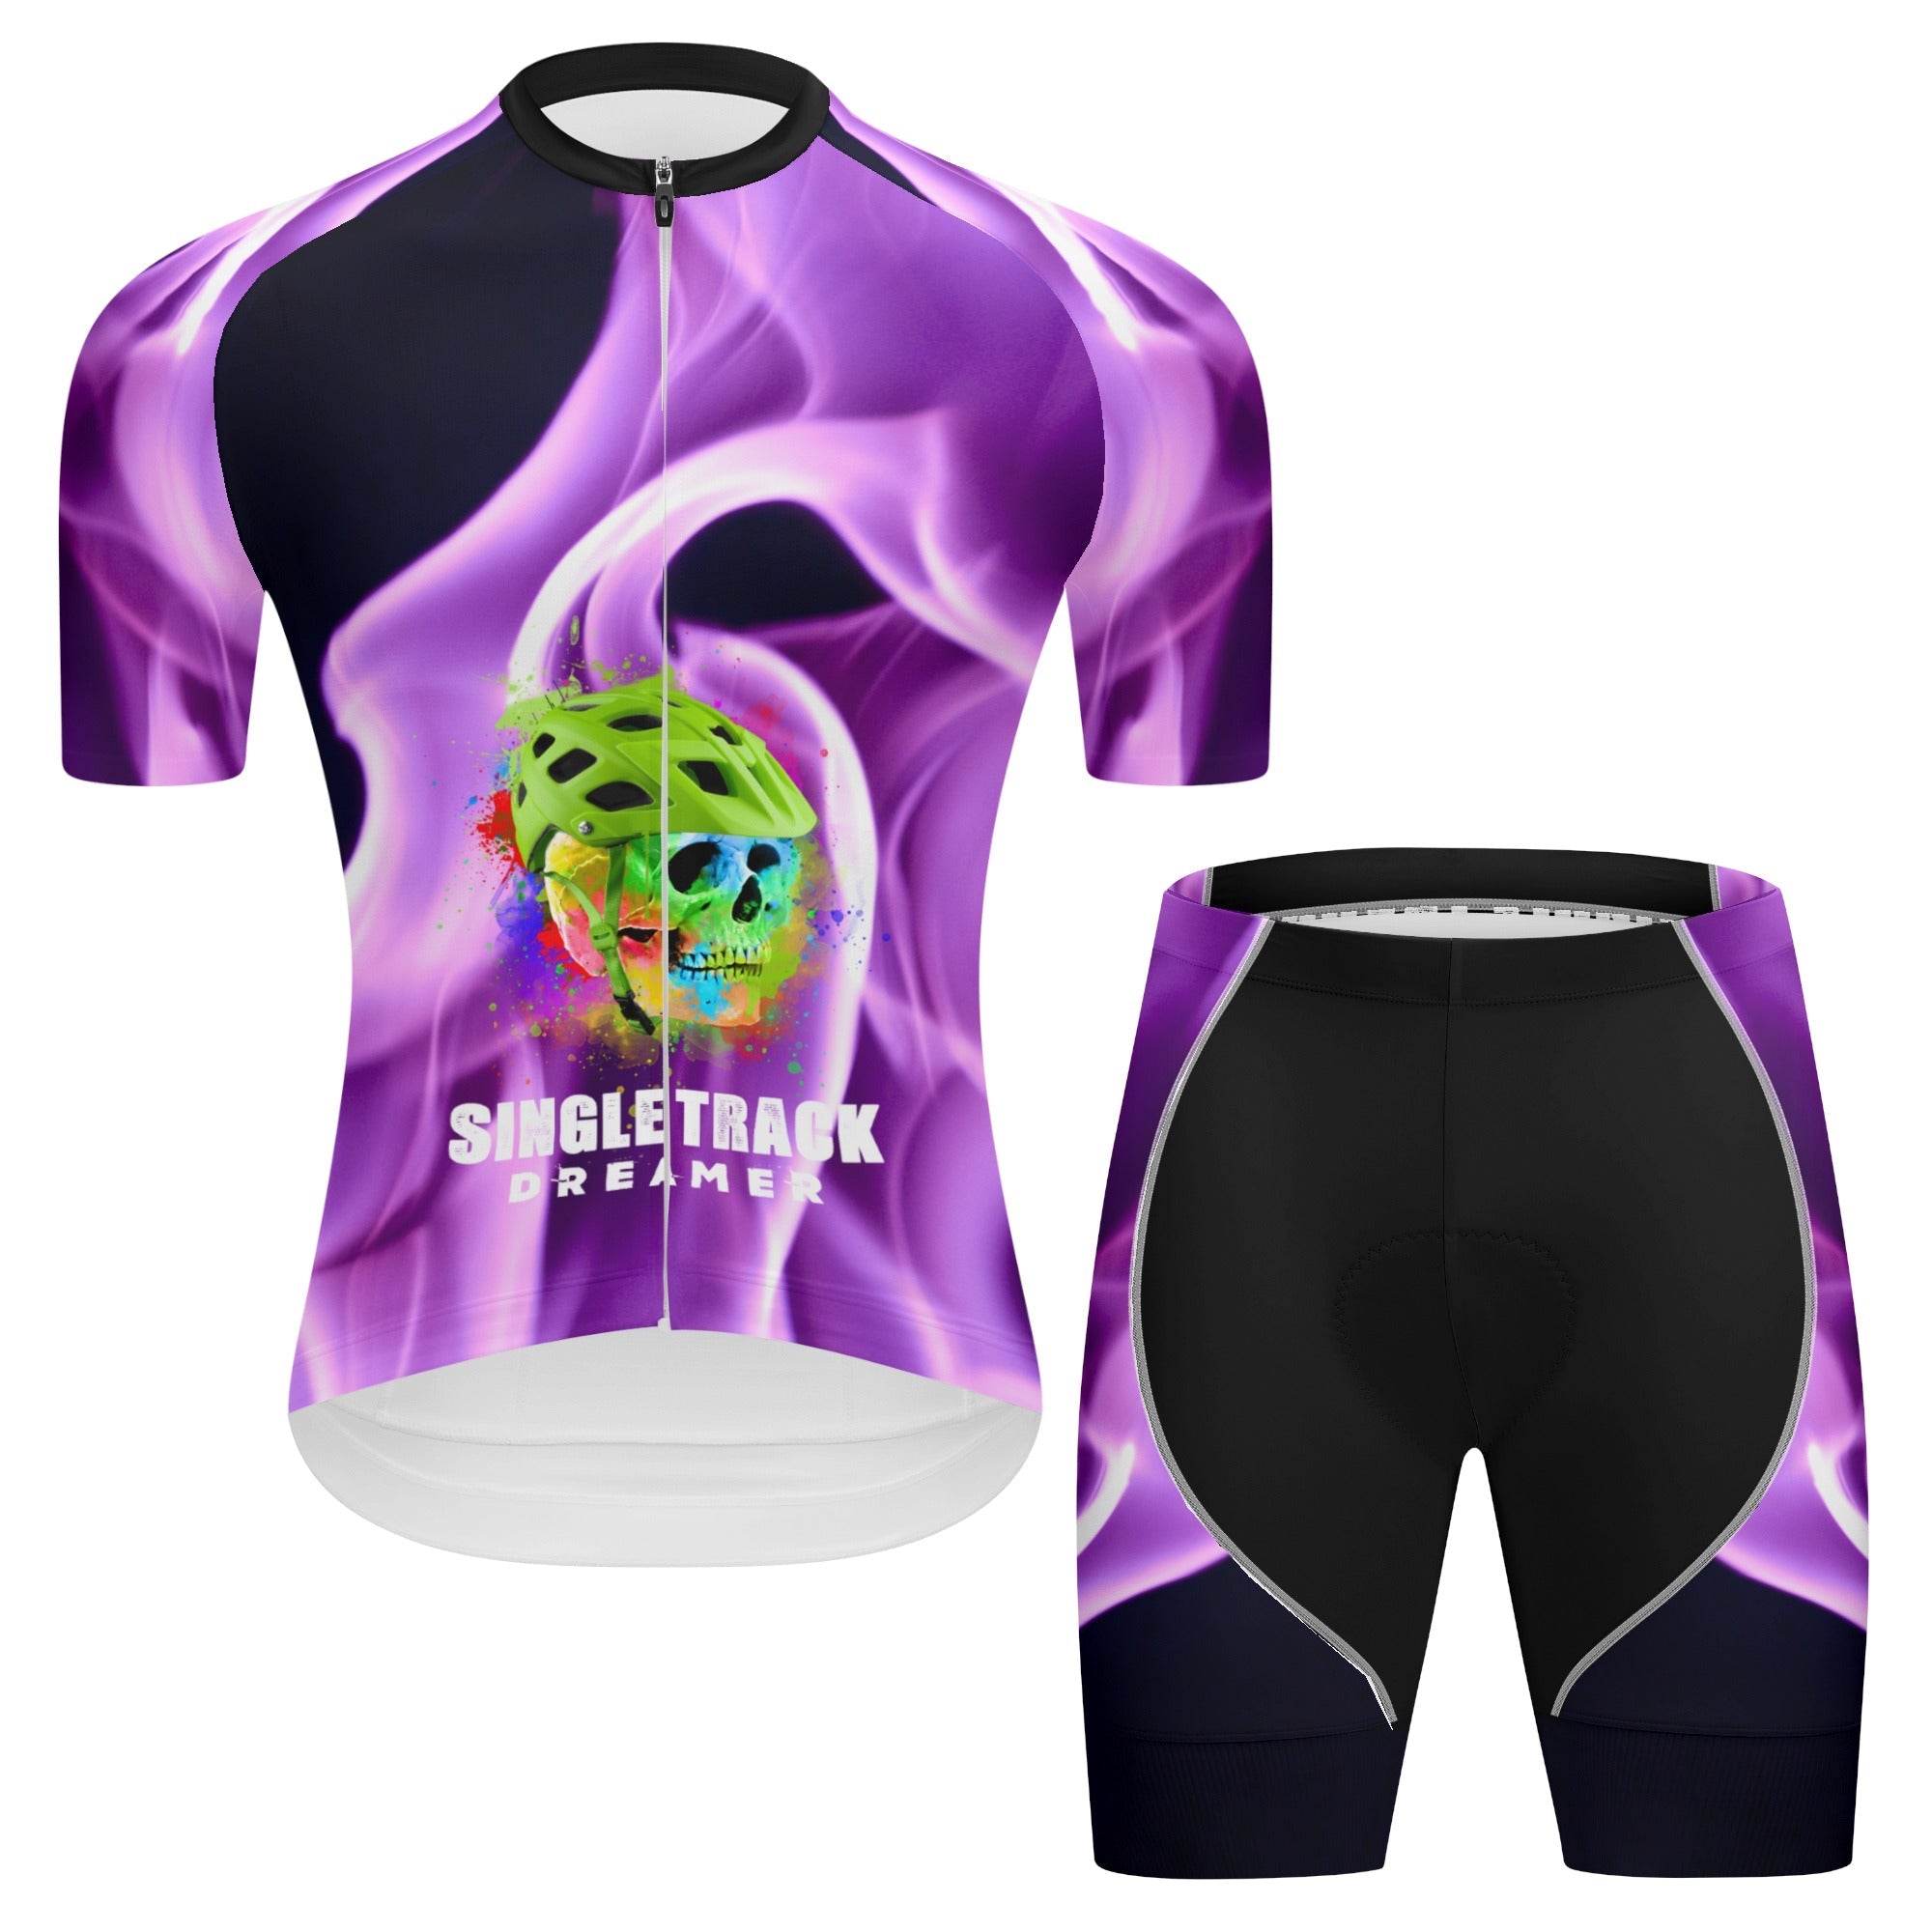 MENS LYCRA MTB JERSEY AND SHORTS | BLUE FLAME | XS - 2XL - Single Track Dreamer